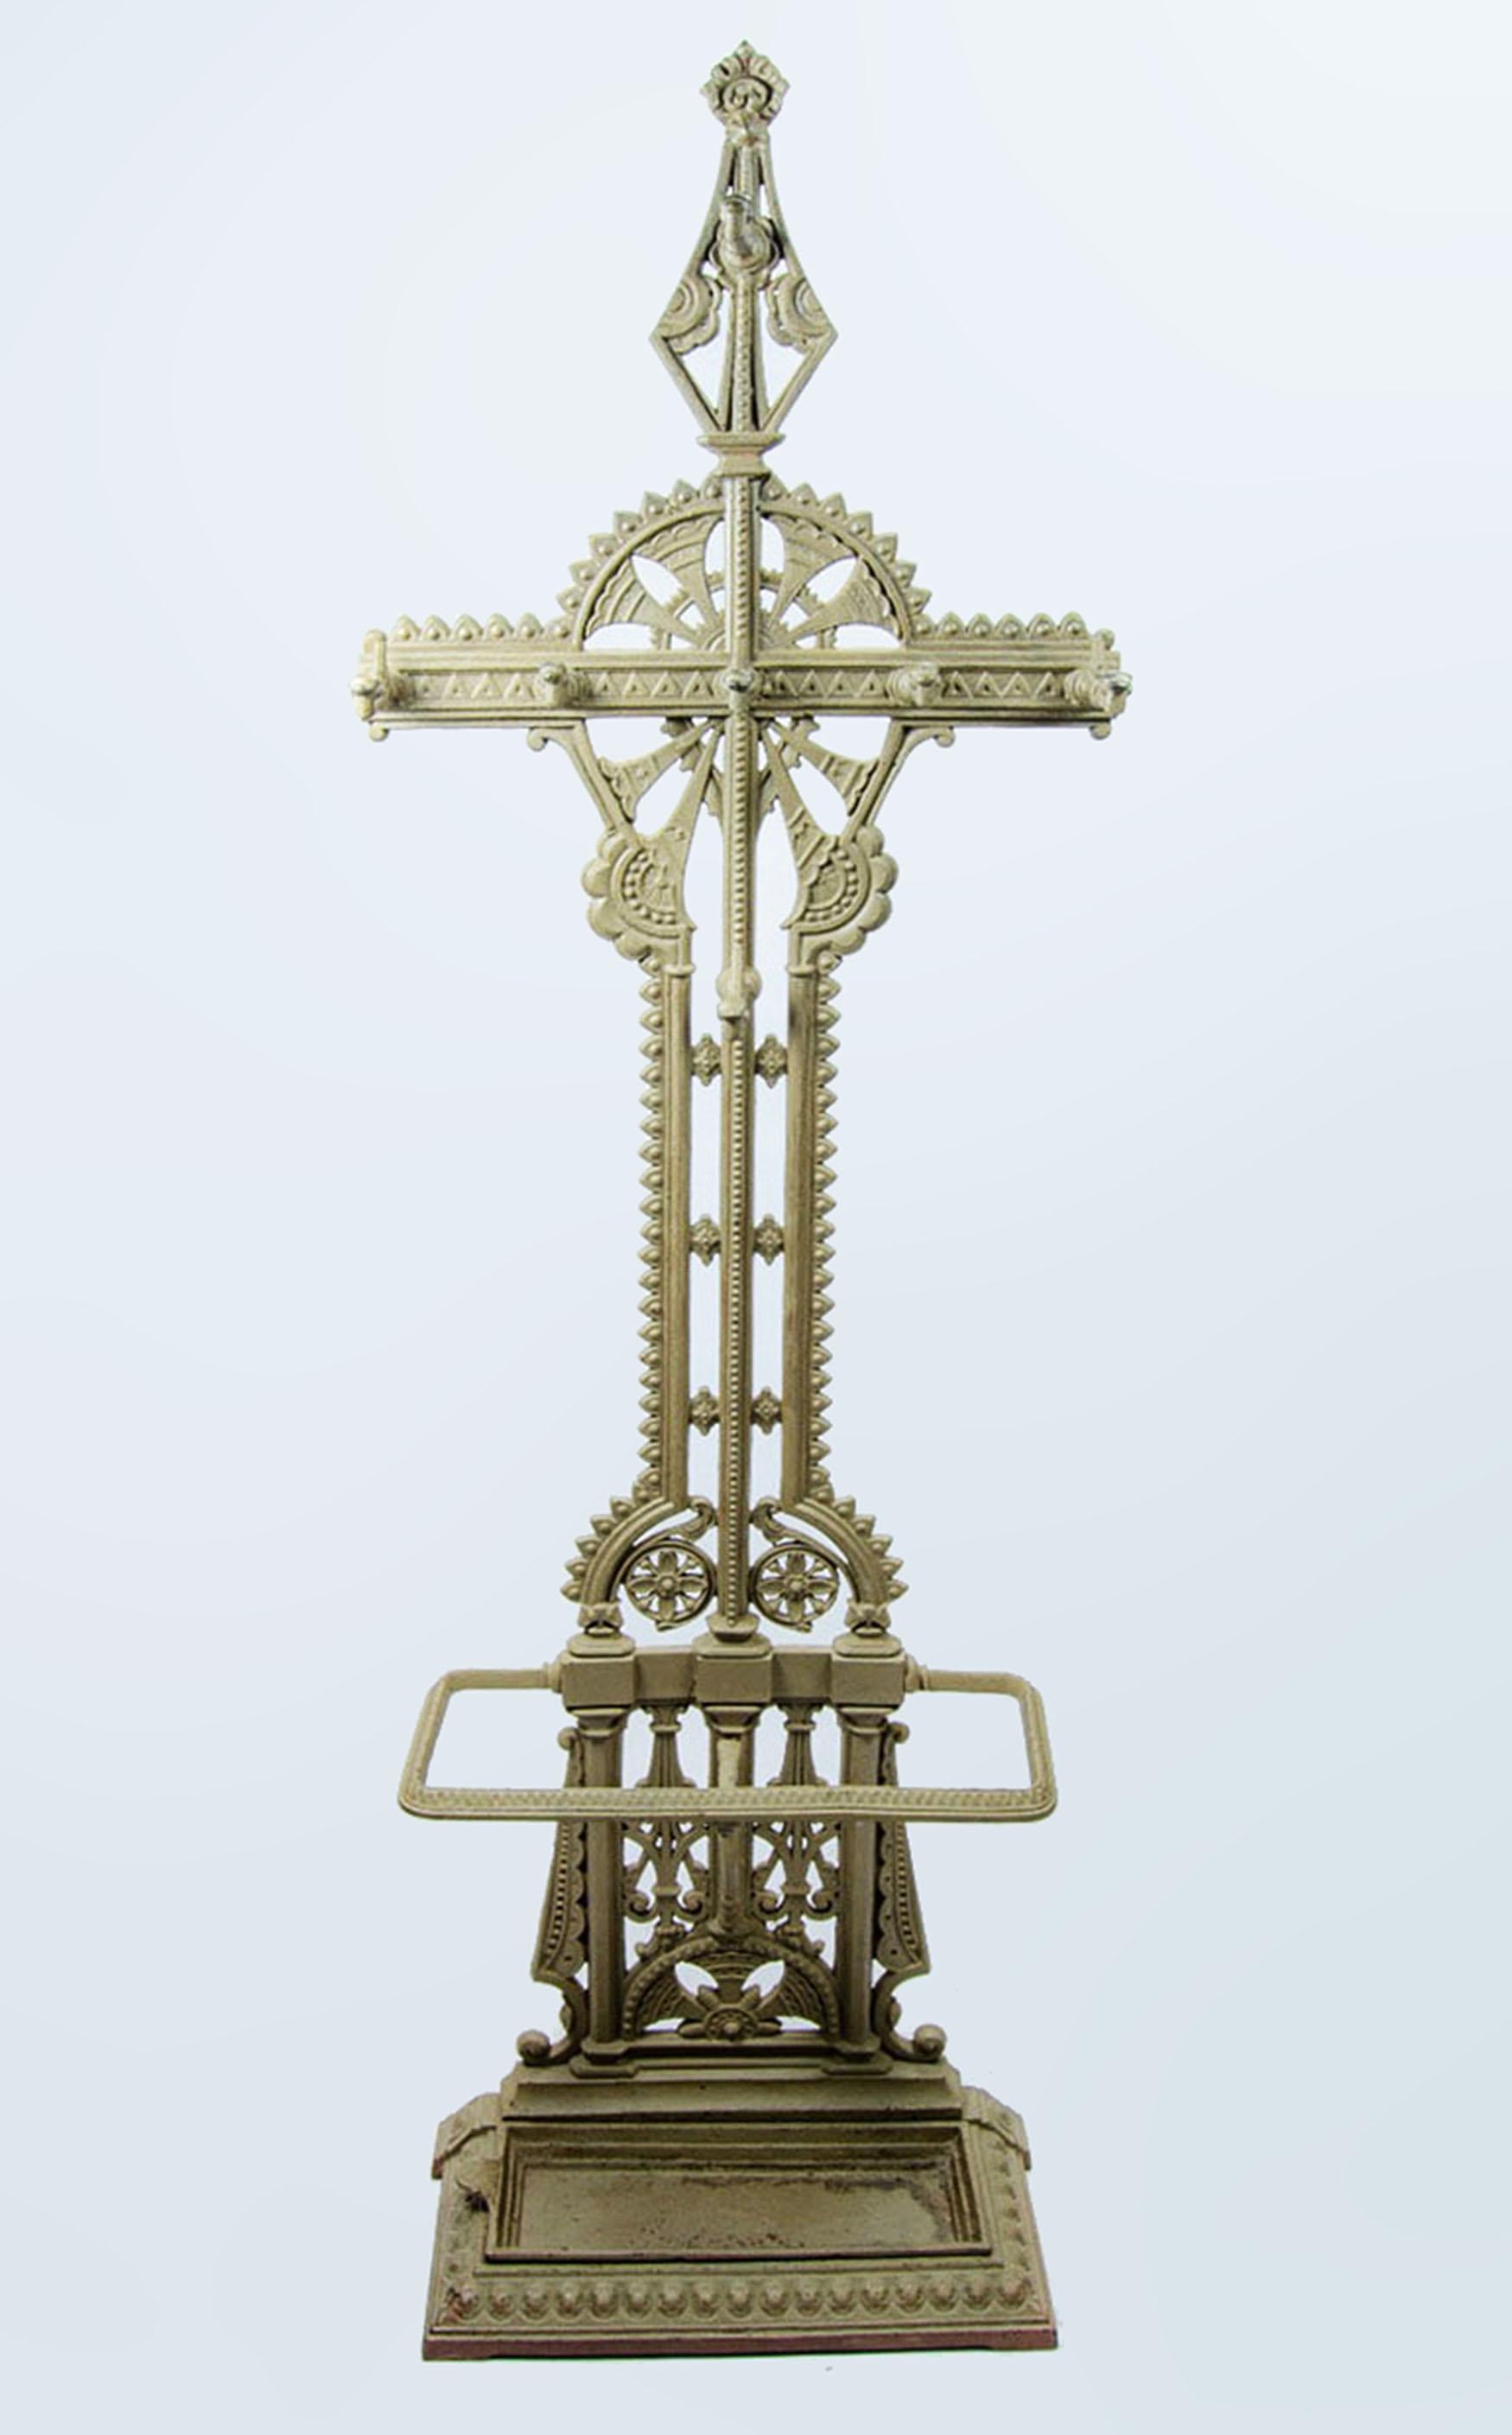 Late 19th century Victorian iron hall stand cross by english author Christopher Dresser for Coalbrookdale Foundry

By: Christopher Dresser, Coalbrookdale Foundry
Material: iron, metal, wrought iron, paint
Technique: cast, molded, metalwork, forged,